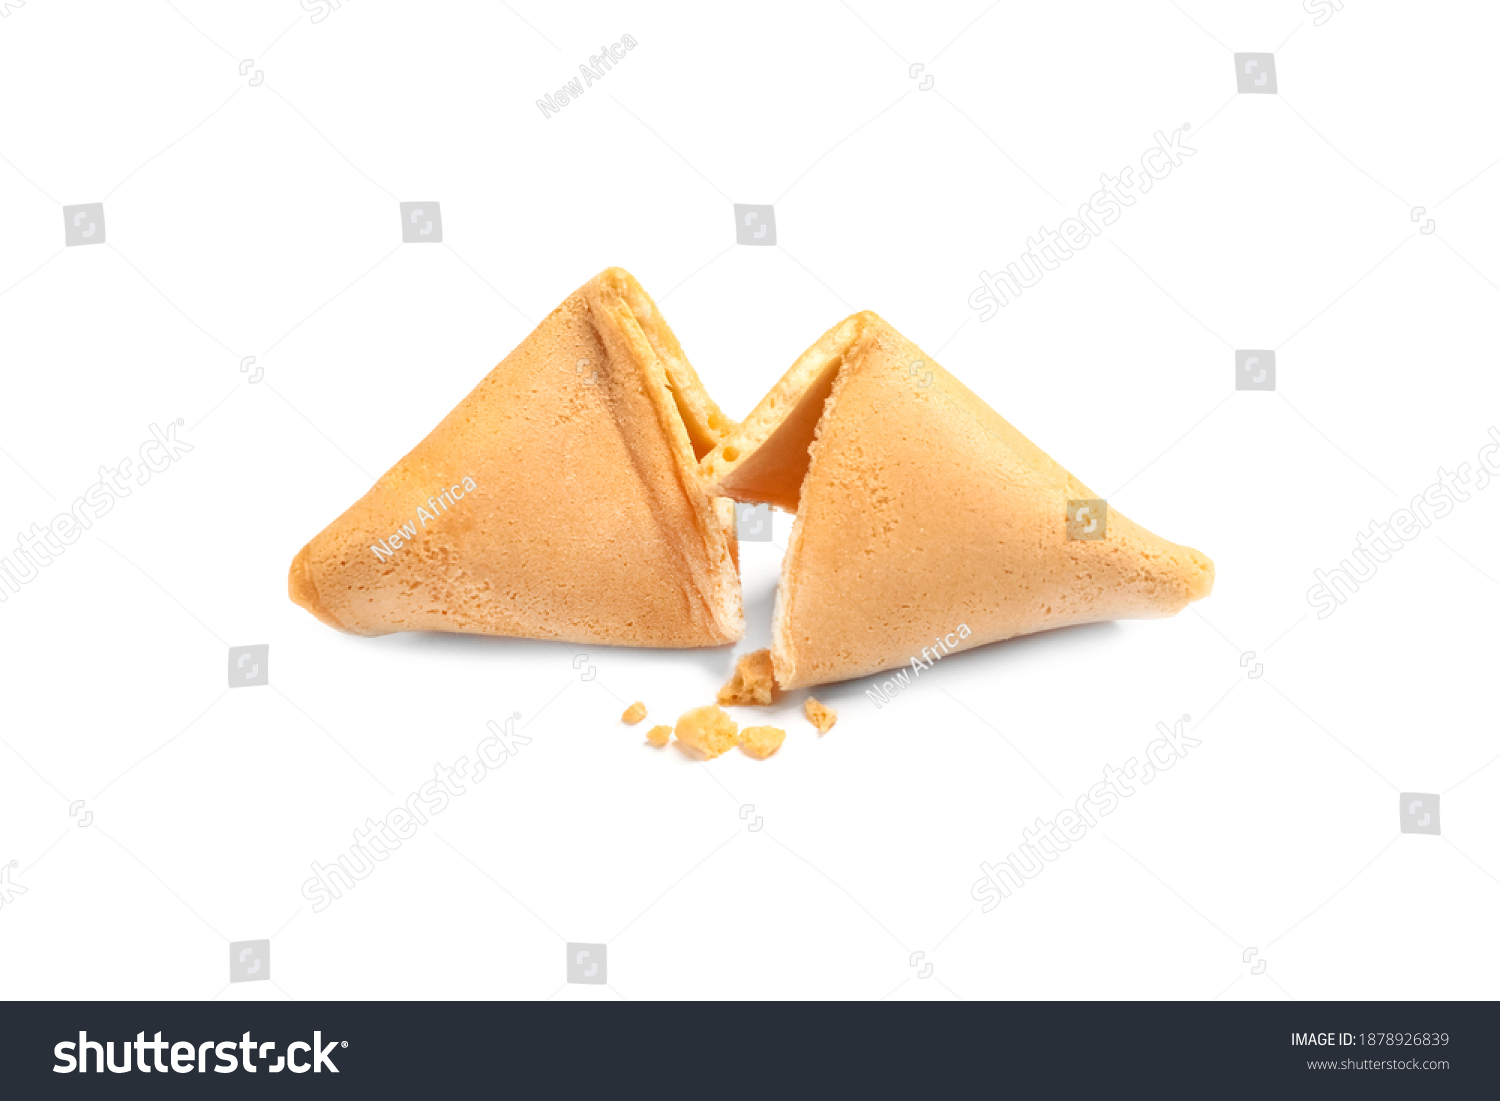 Traditional homemade fortune cookie isolated on white #1878926839